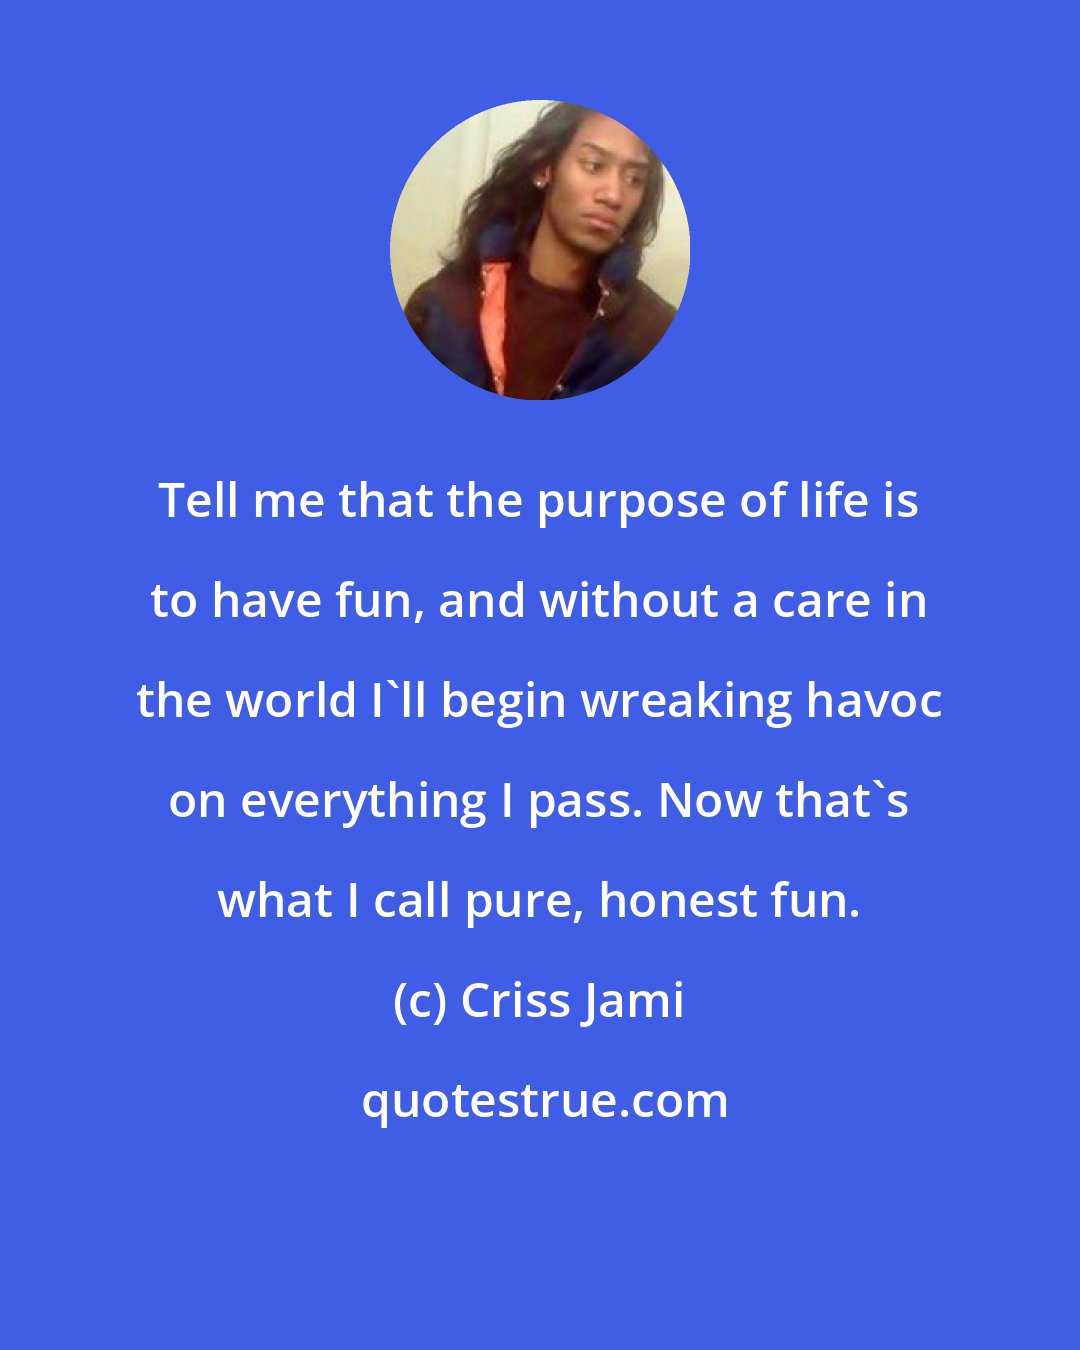 Criss Jami: Tell me that the purpose of life is to have fun, and without a care in the world I'll begin wreaking havoc on everything I pass. Now that's what I call pure, honest fun.